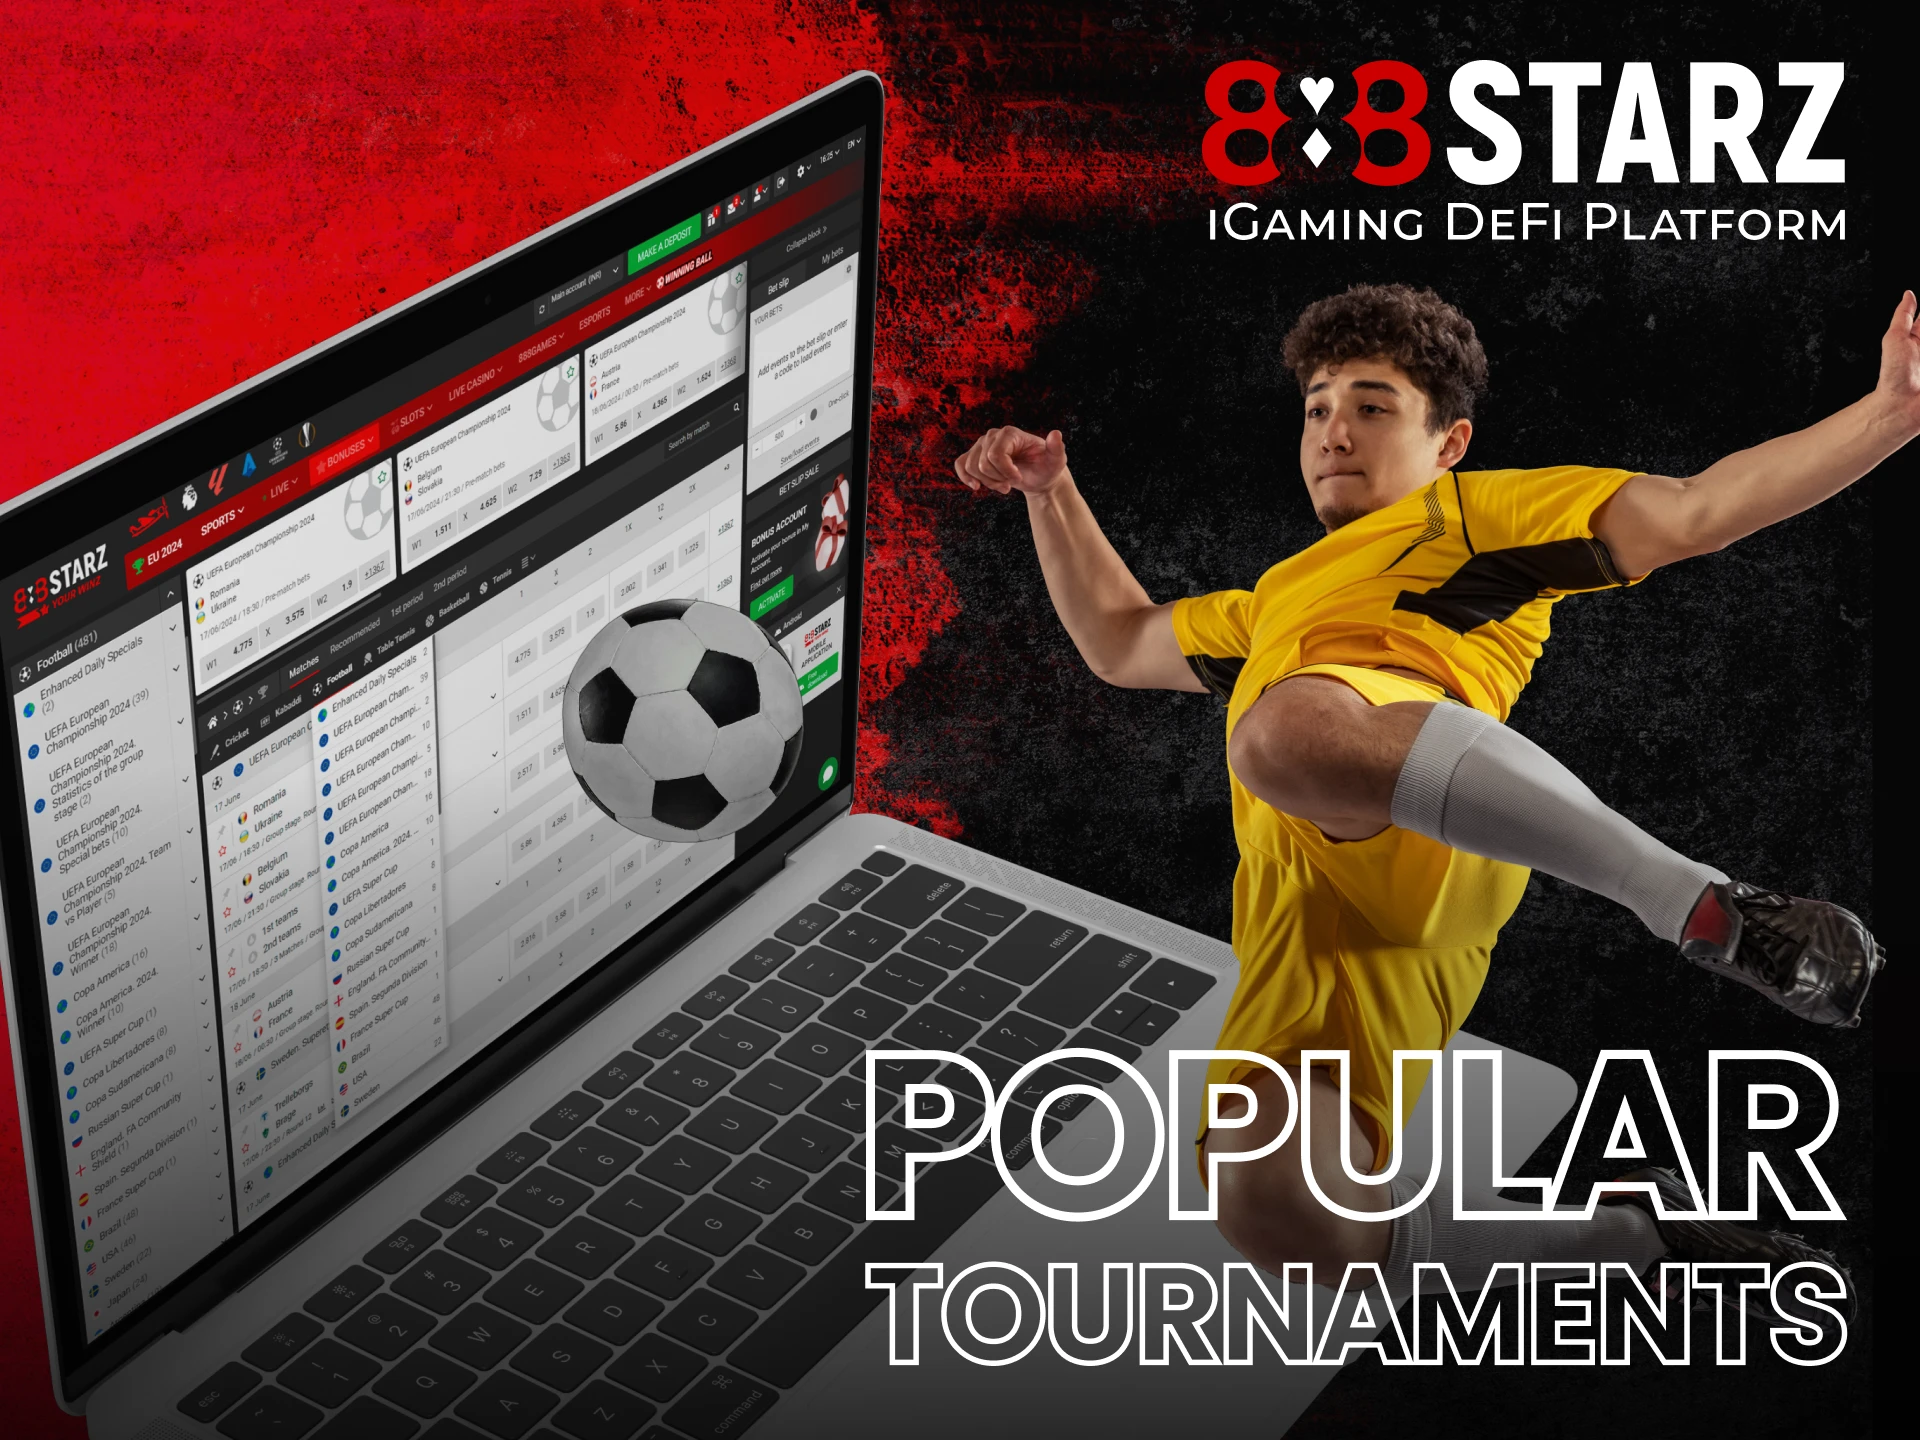 At 888Starz you can bet on these popular football tournaments.